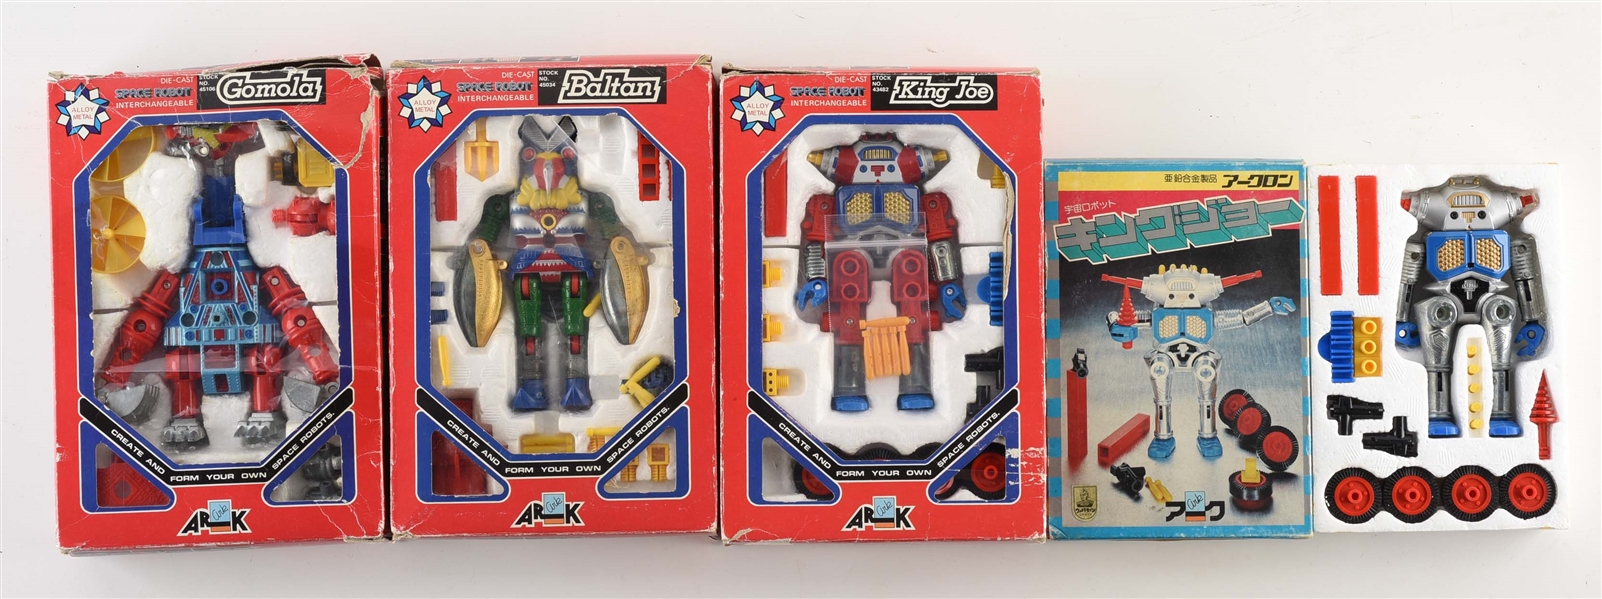 LOT OF 4: JAPANESE ARK DIE-CAST CHARACTER FIGURES IN BOXES. 